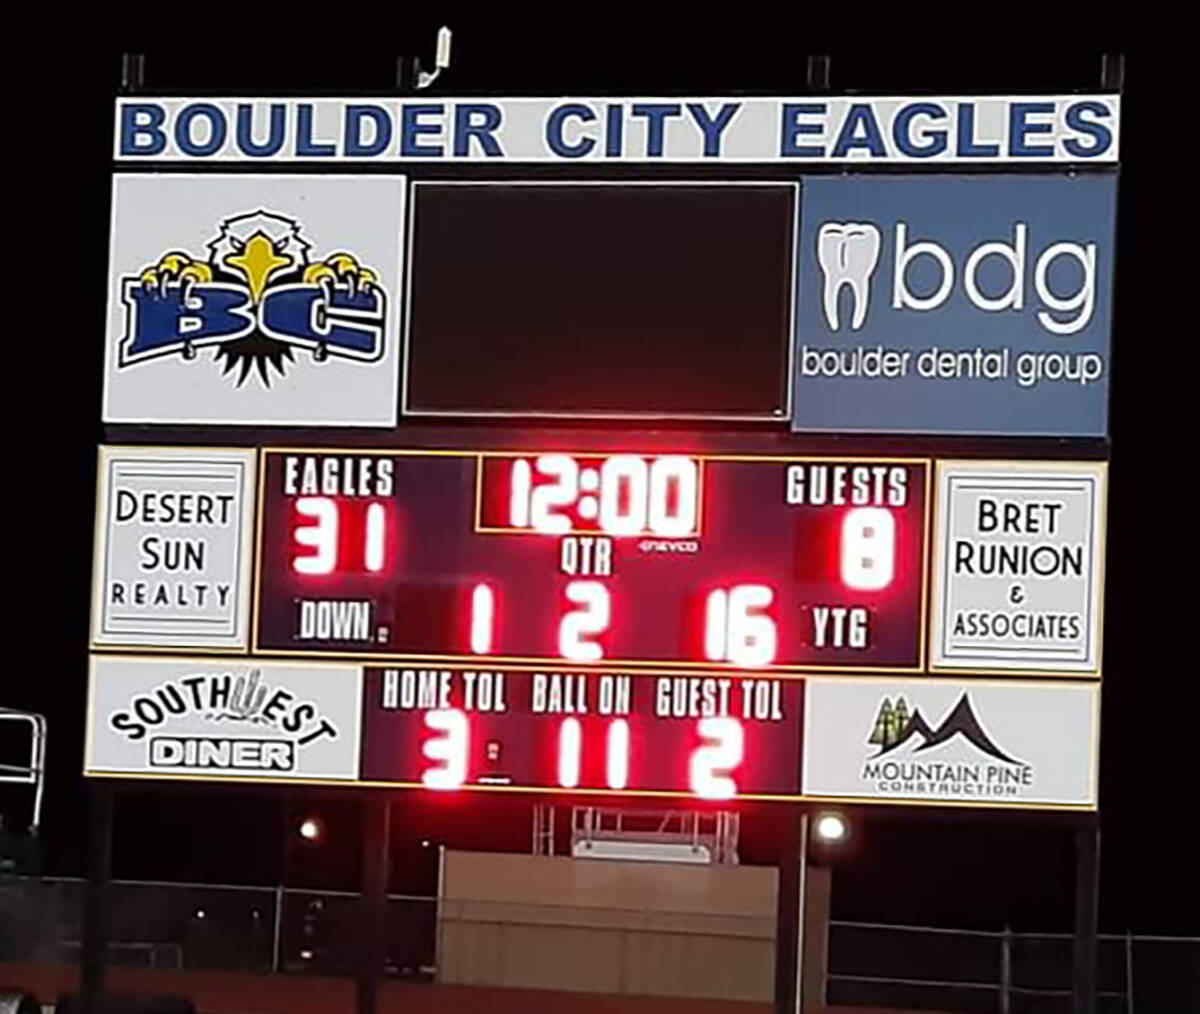 The Eagles dominated the game against Valley and were up 31-8 after just one quarter.